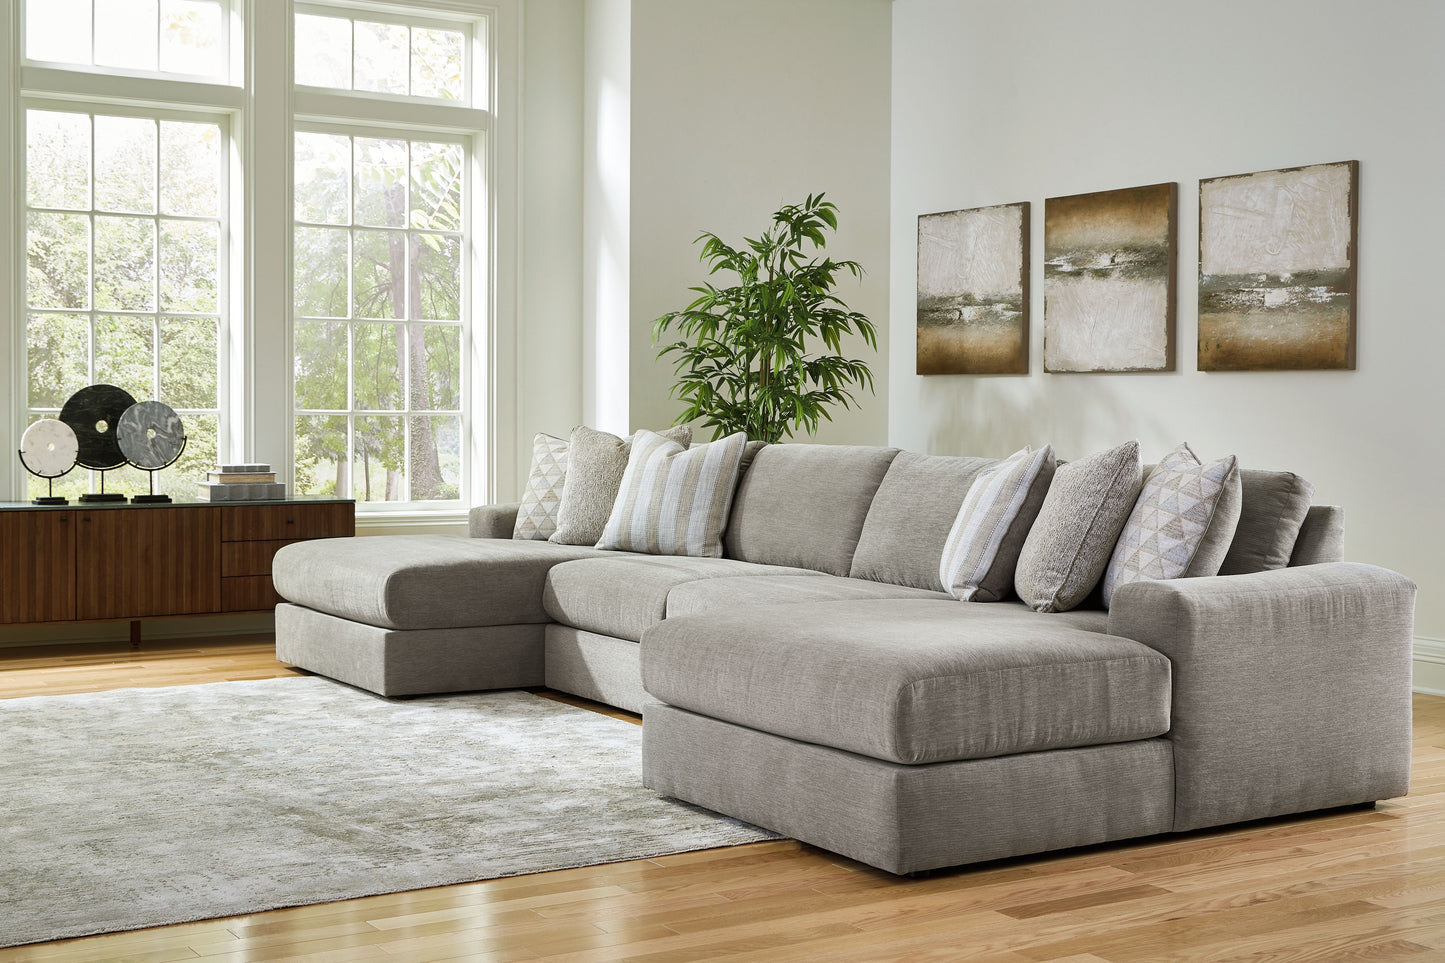 Avaliyah - Ash - 5 Pc. - 4-Piece Double Chaise Sectional, Ottoman